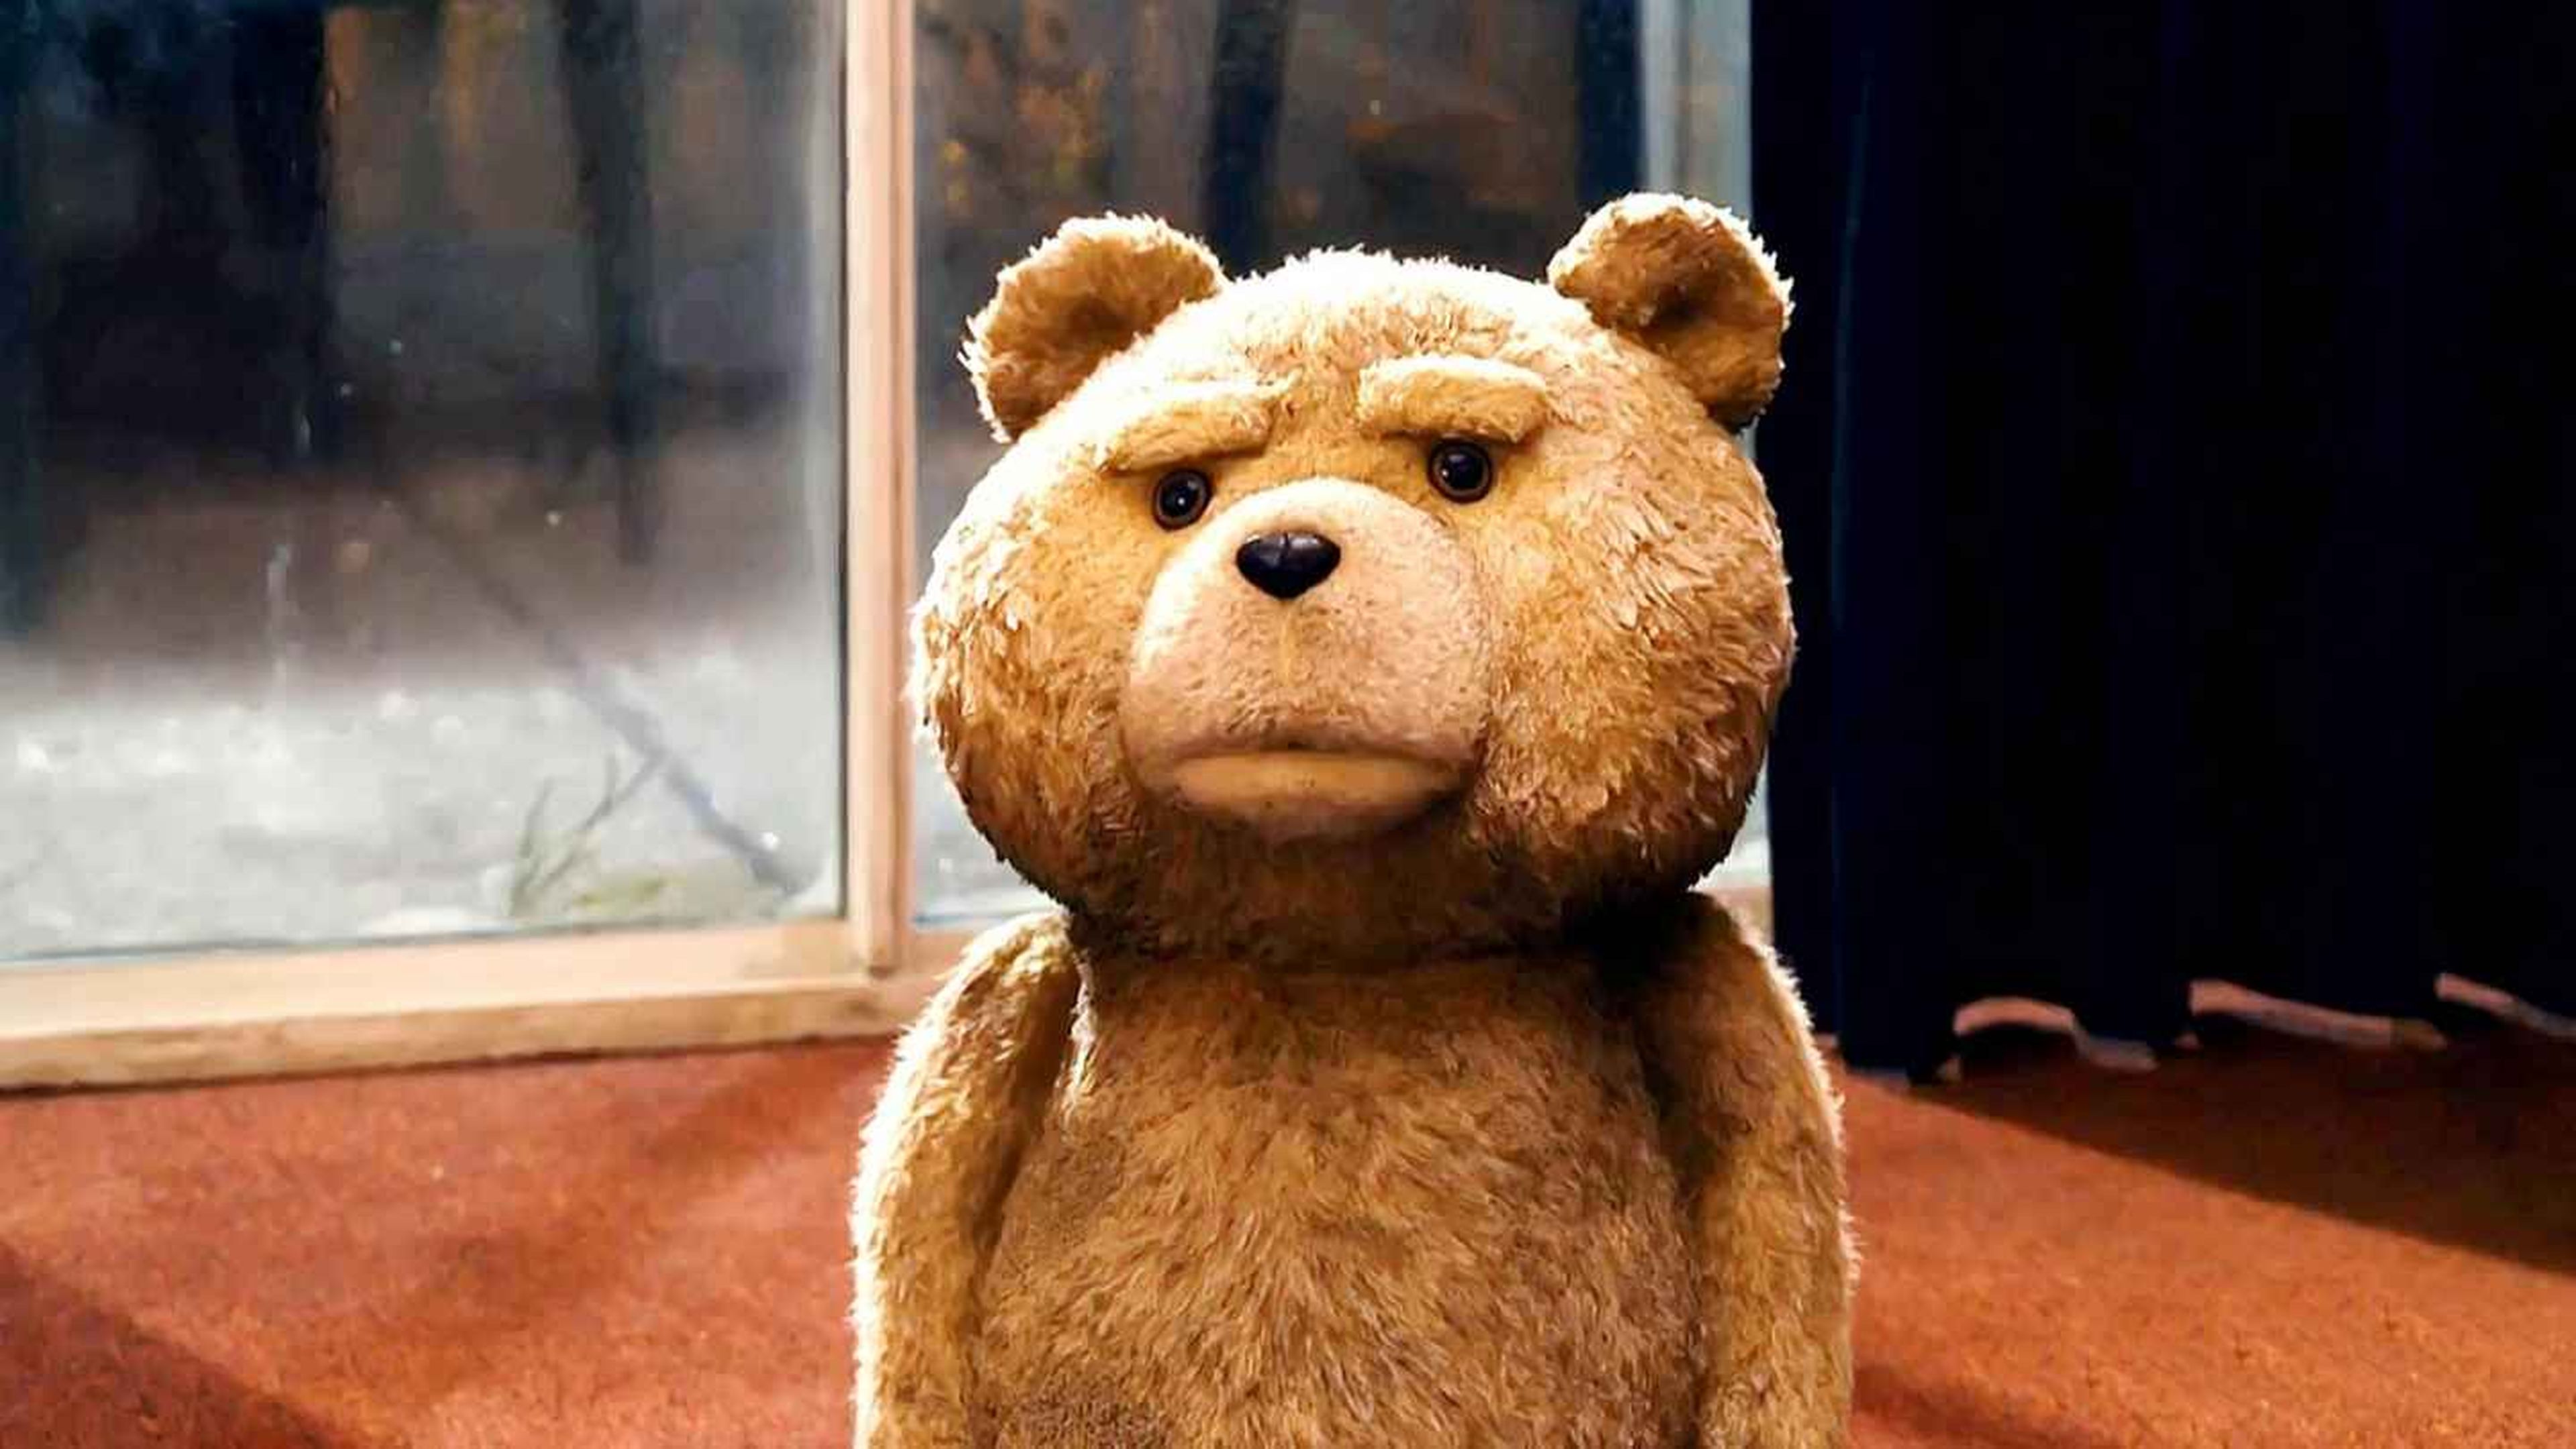 Ted (2012)